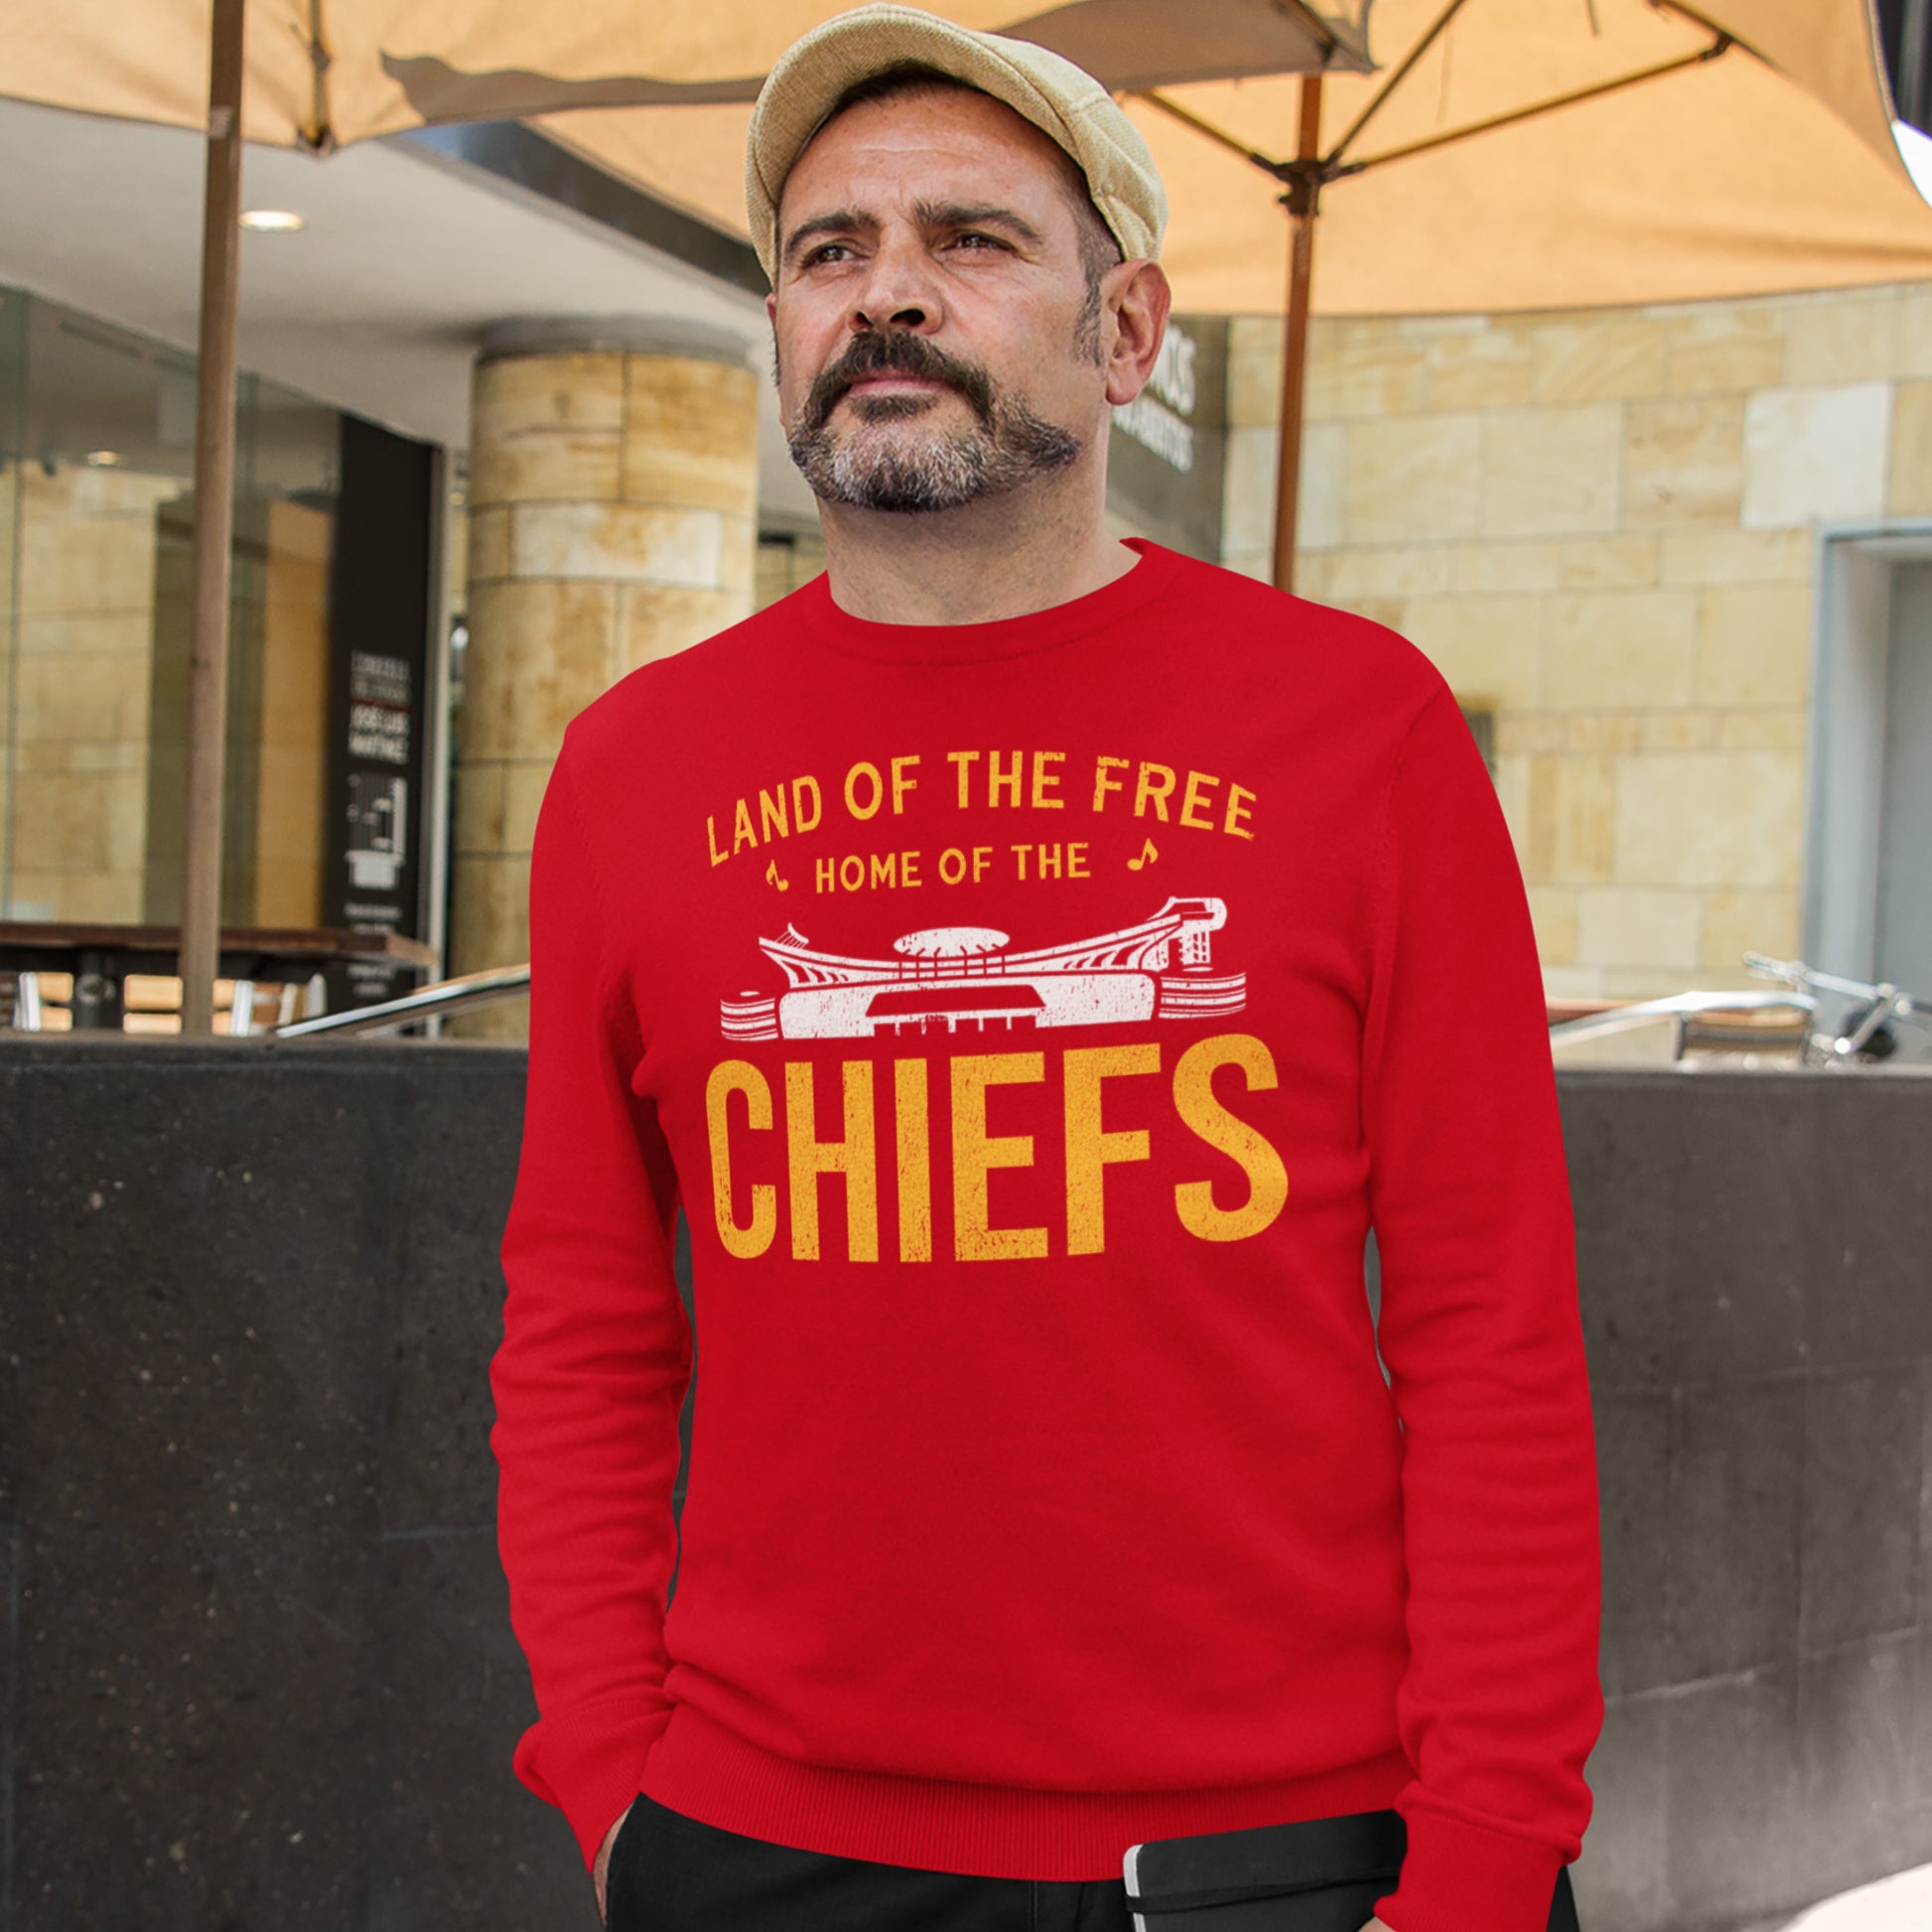 KC Swag Kansas City Chiefs Distressed White & Gold Home Of The Chiefs on a Red Crewneck Sweatshirt worn by a bearded male model wearing a hat walking through an outdoor restaurant patio